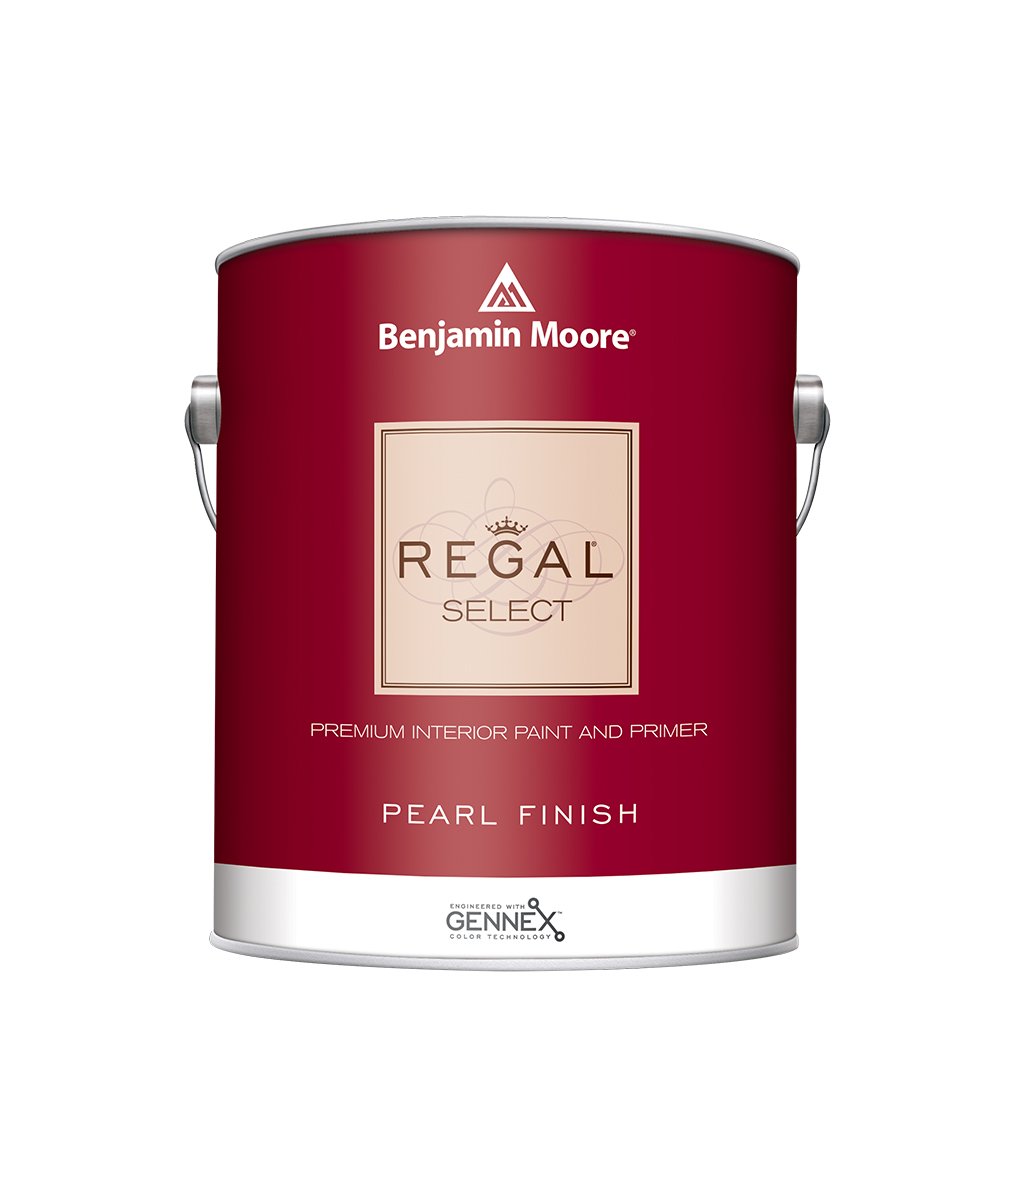 Benjamin Moore Regal Select Pearl Paint available at JC Licht.